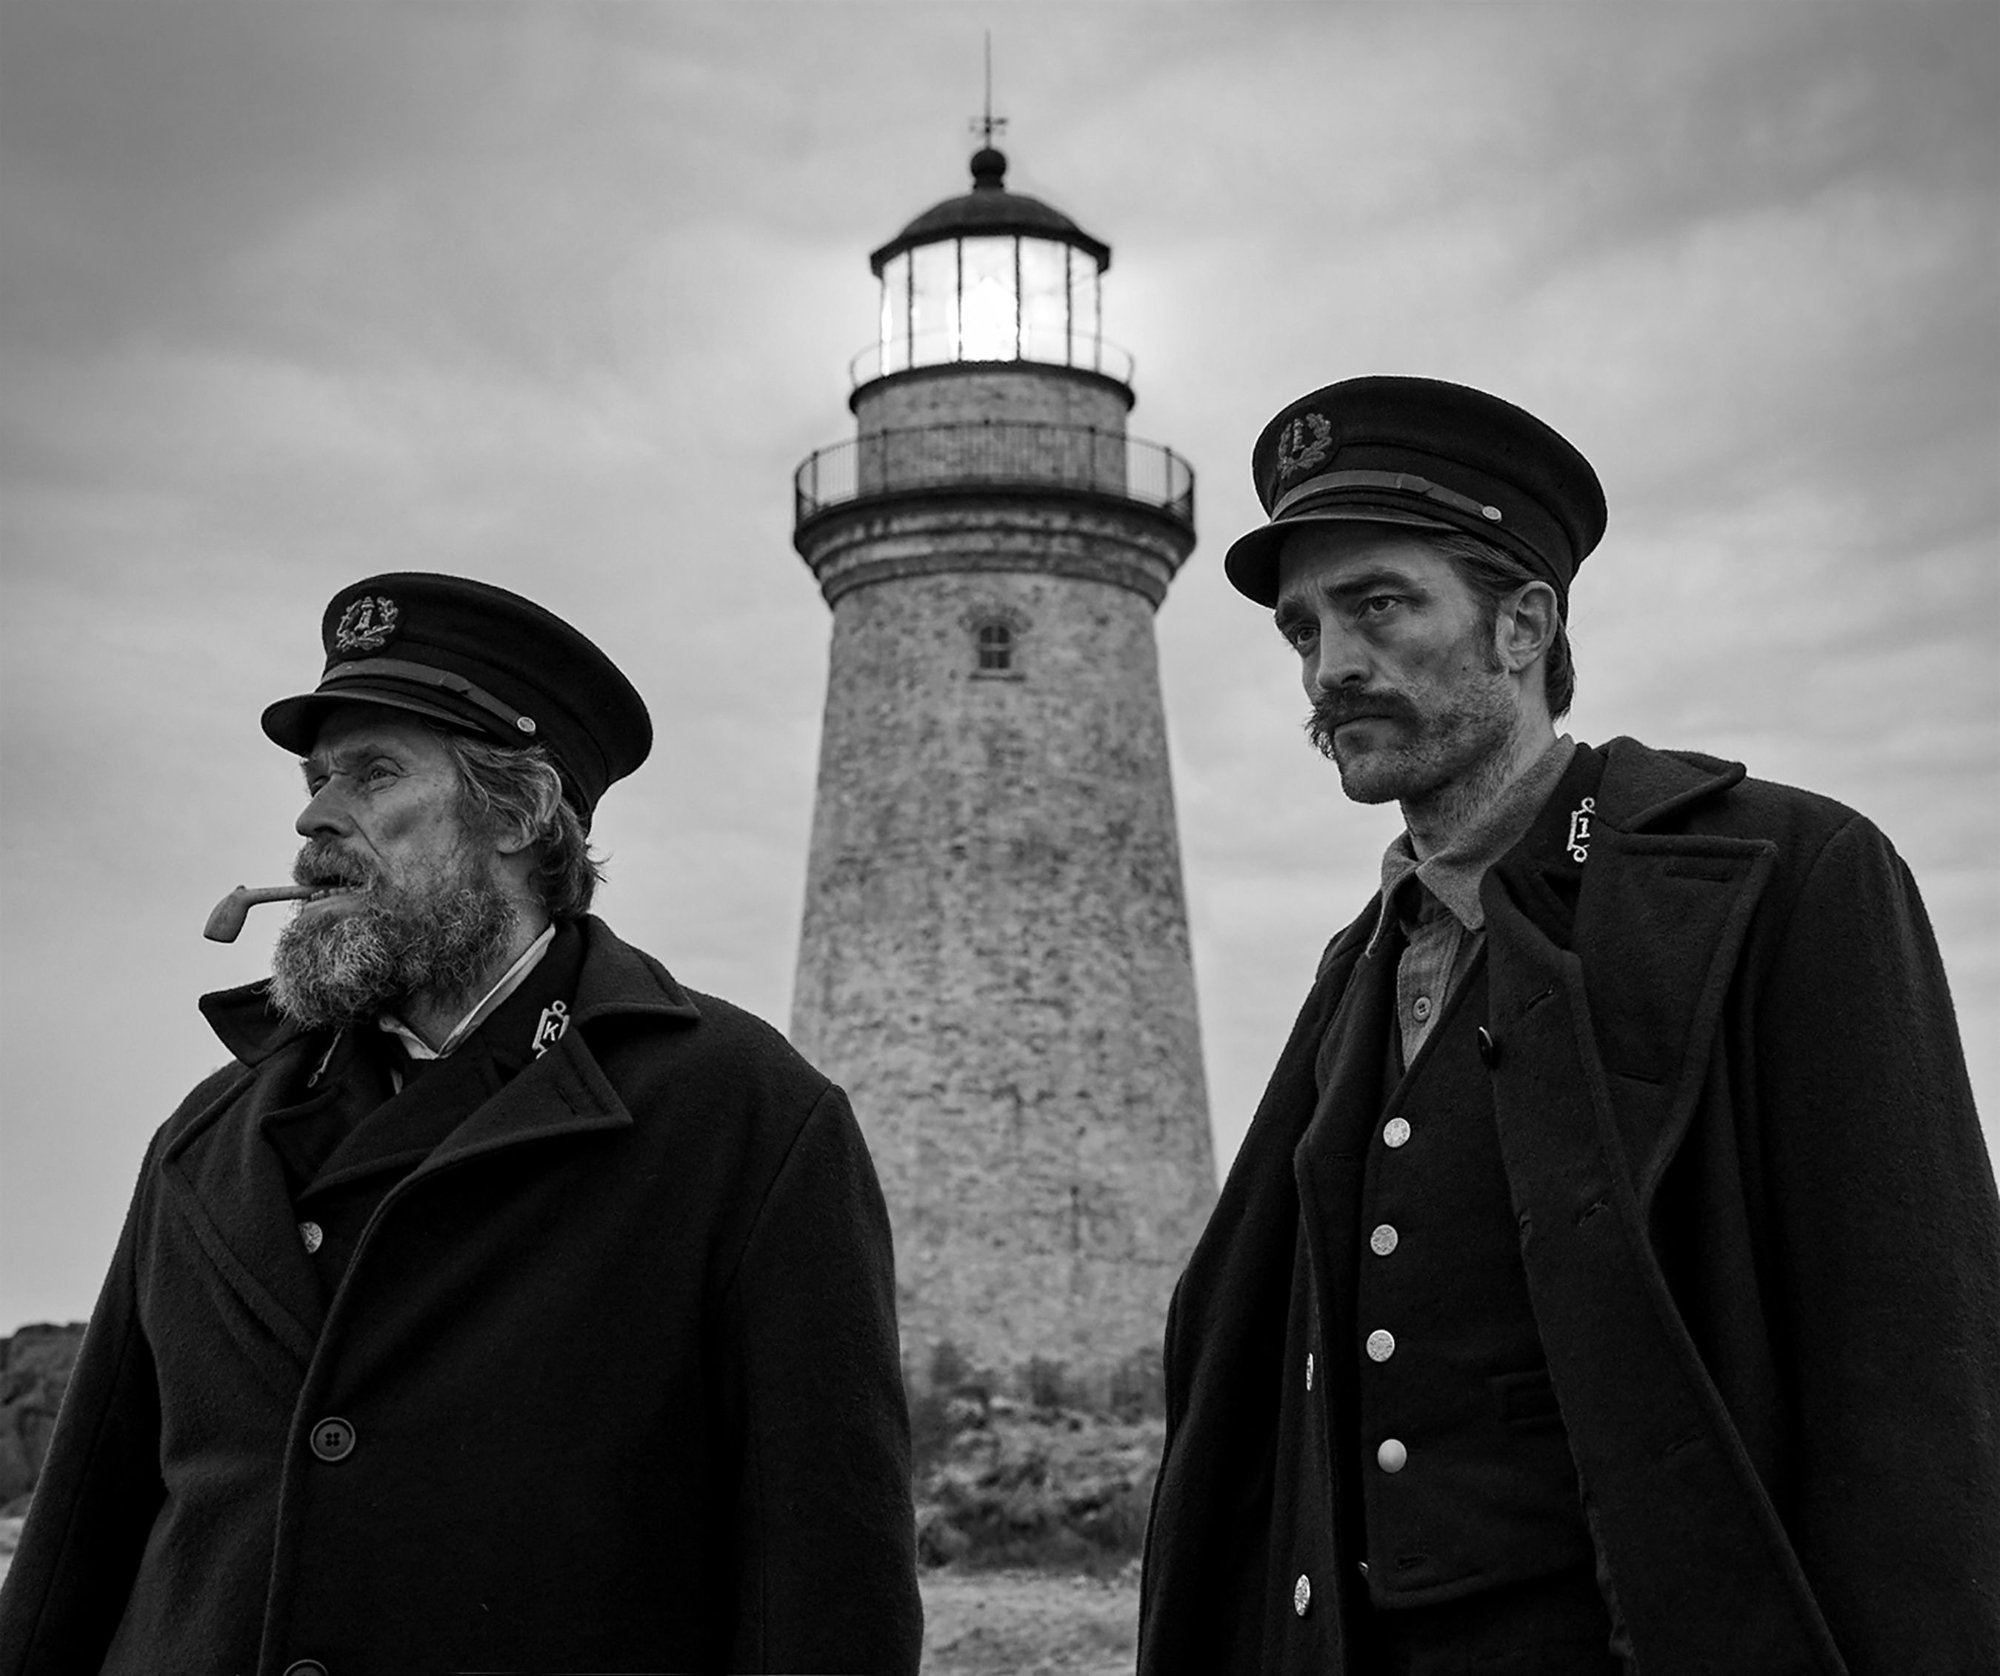 'The Lighthouse' Willem Dafoe as Thomas Wake and Robert Pattinson as Thomas Howard standing in front of a lighthouse